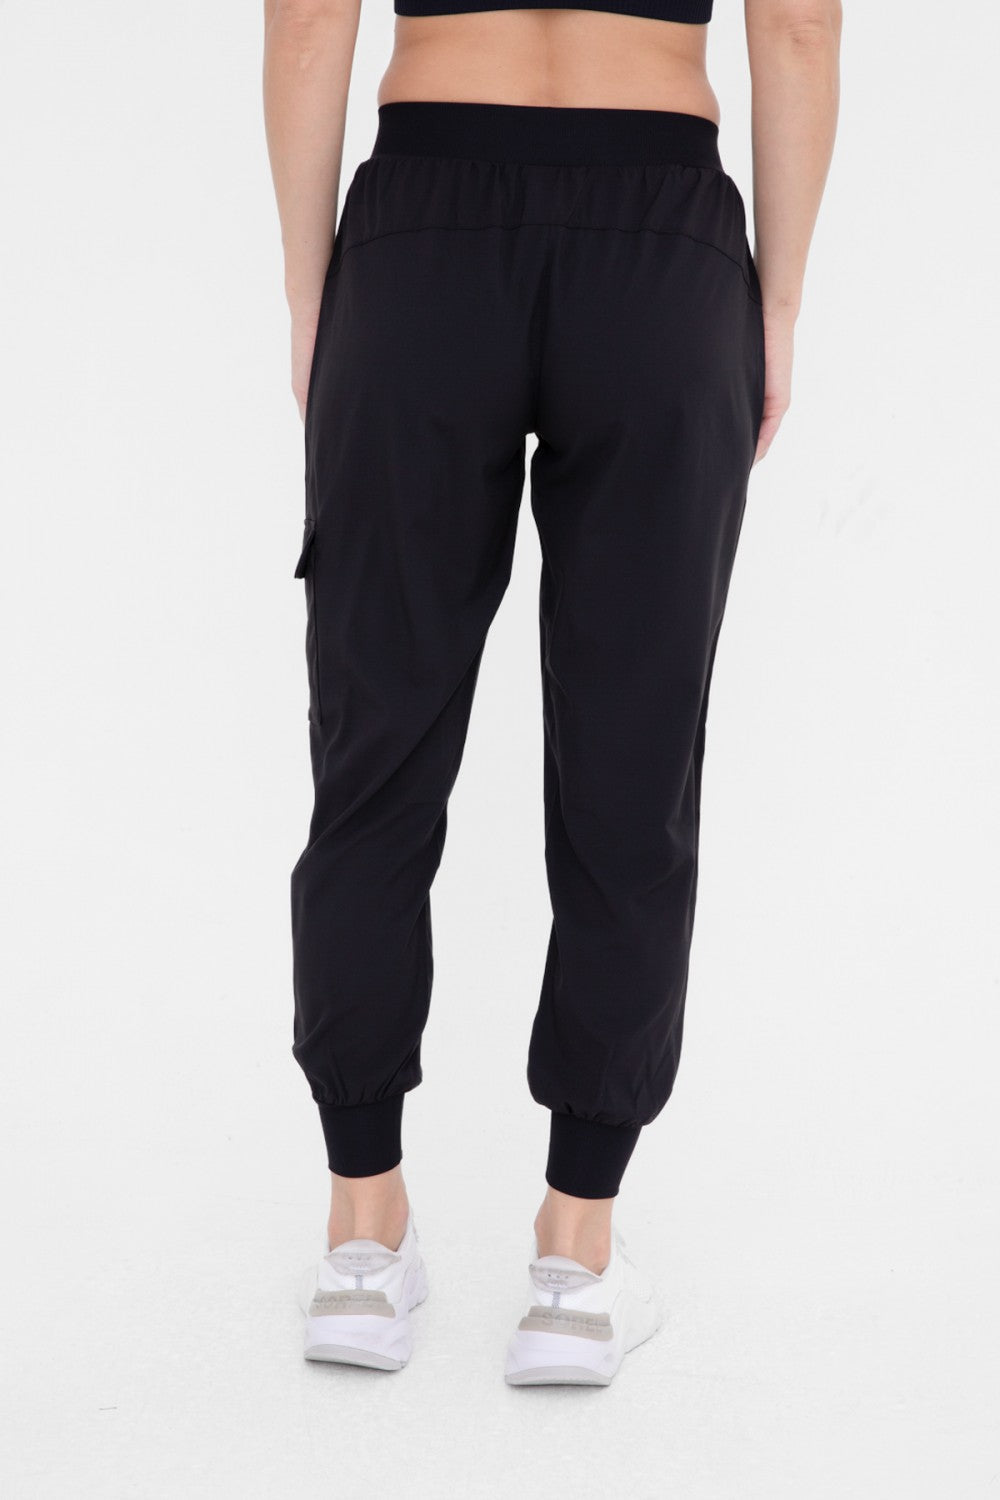 High-Waisted Capri Active Joggers with Pockets - AP-B0115